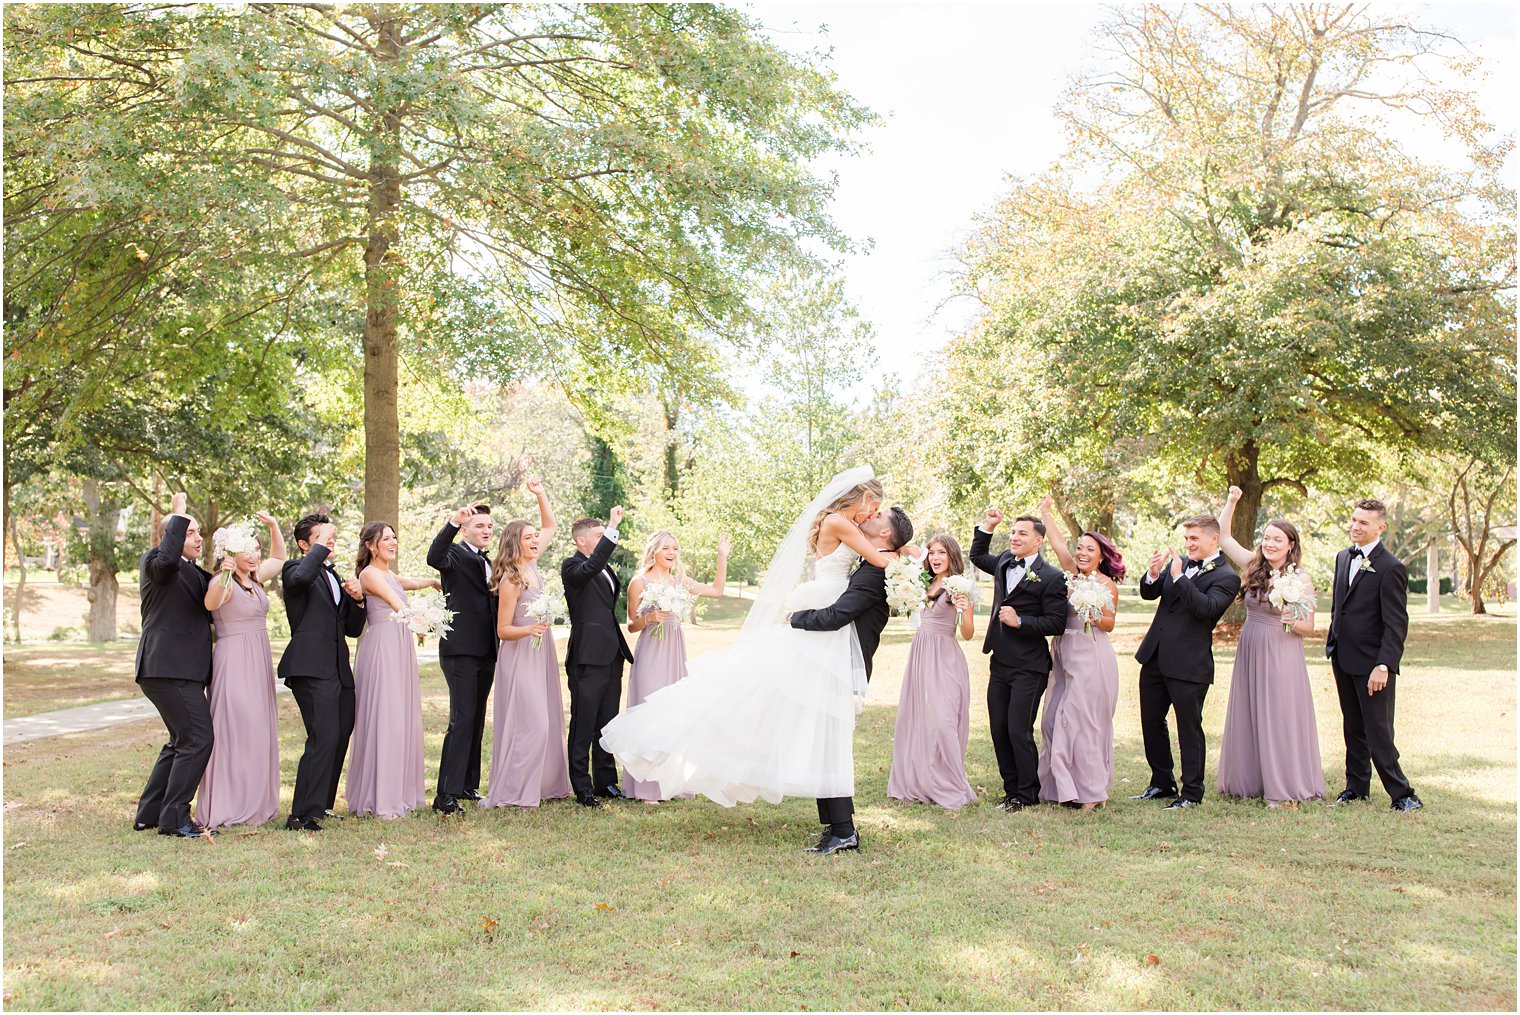 groom lifts bride up with wedding party behind them